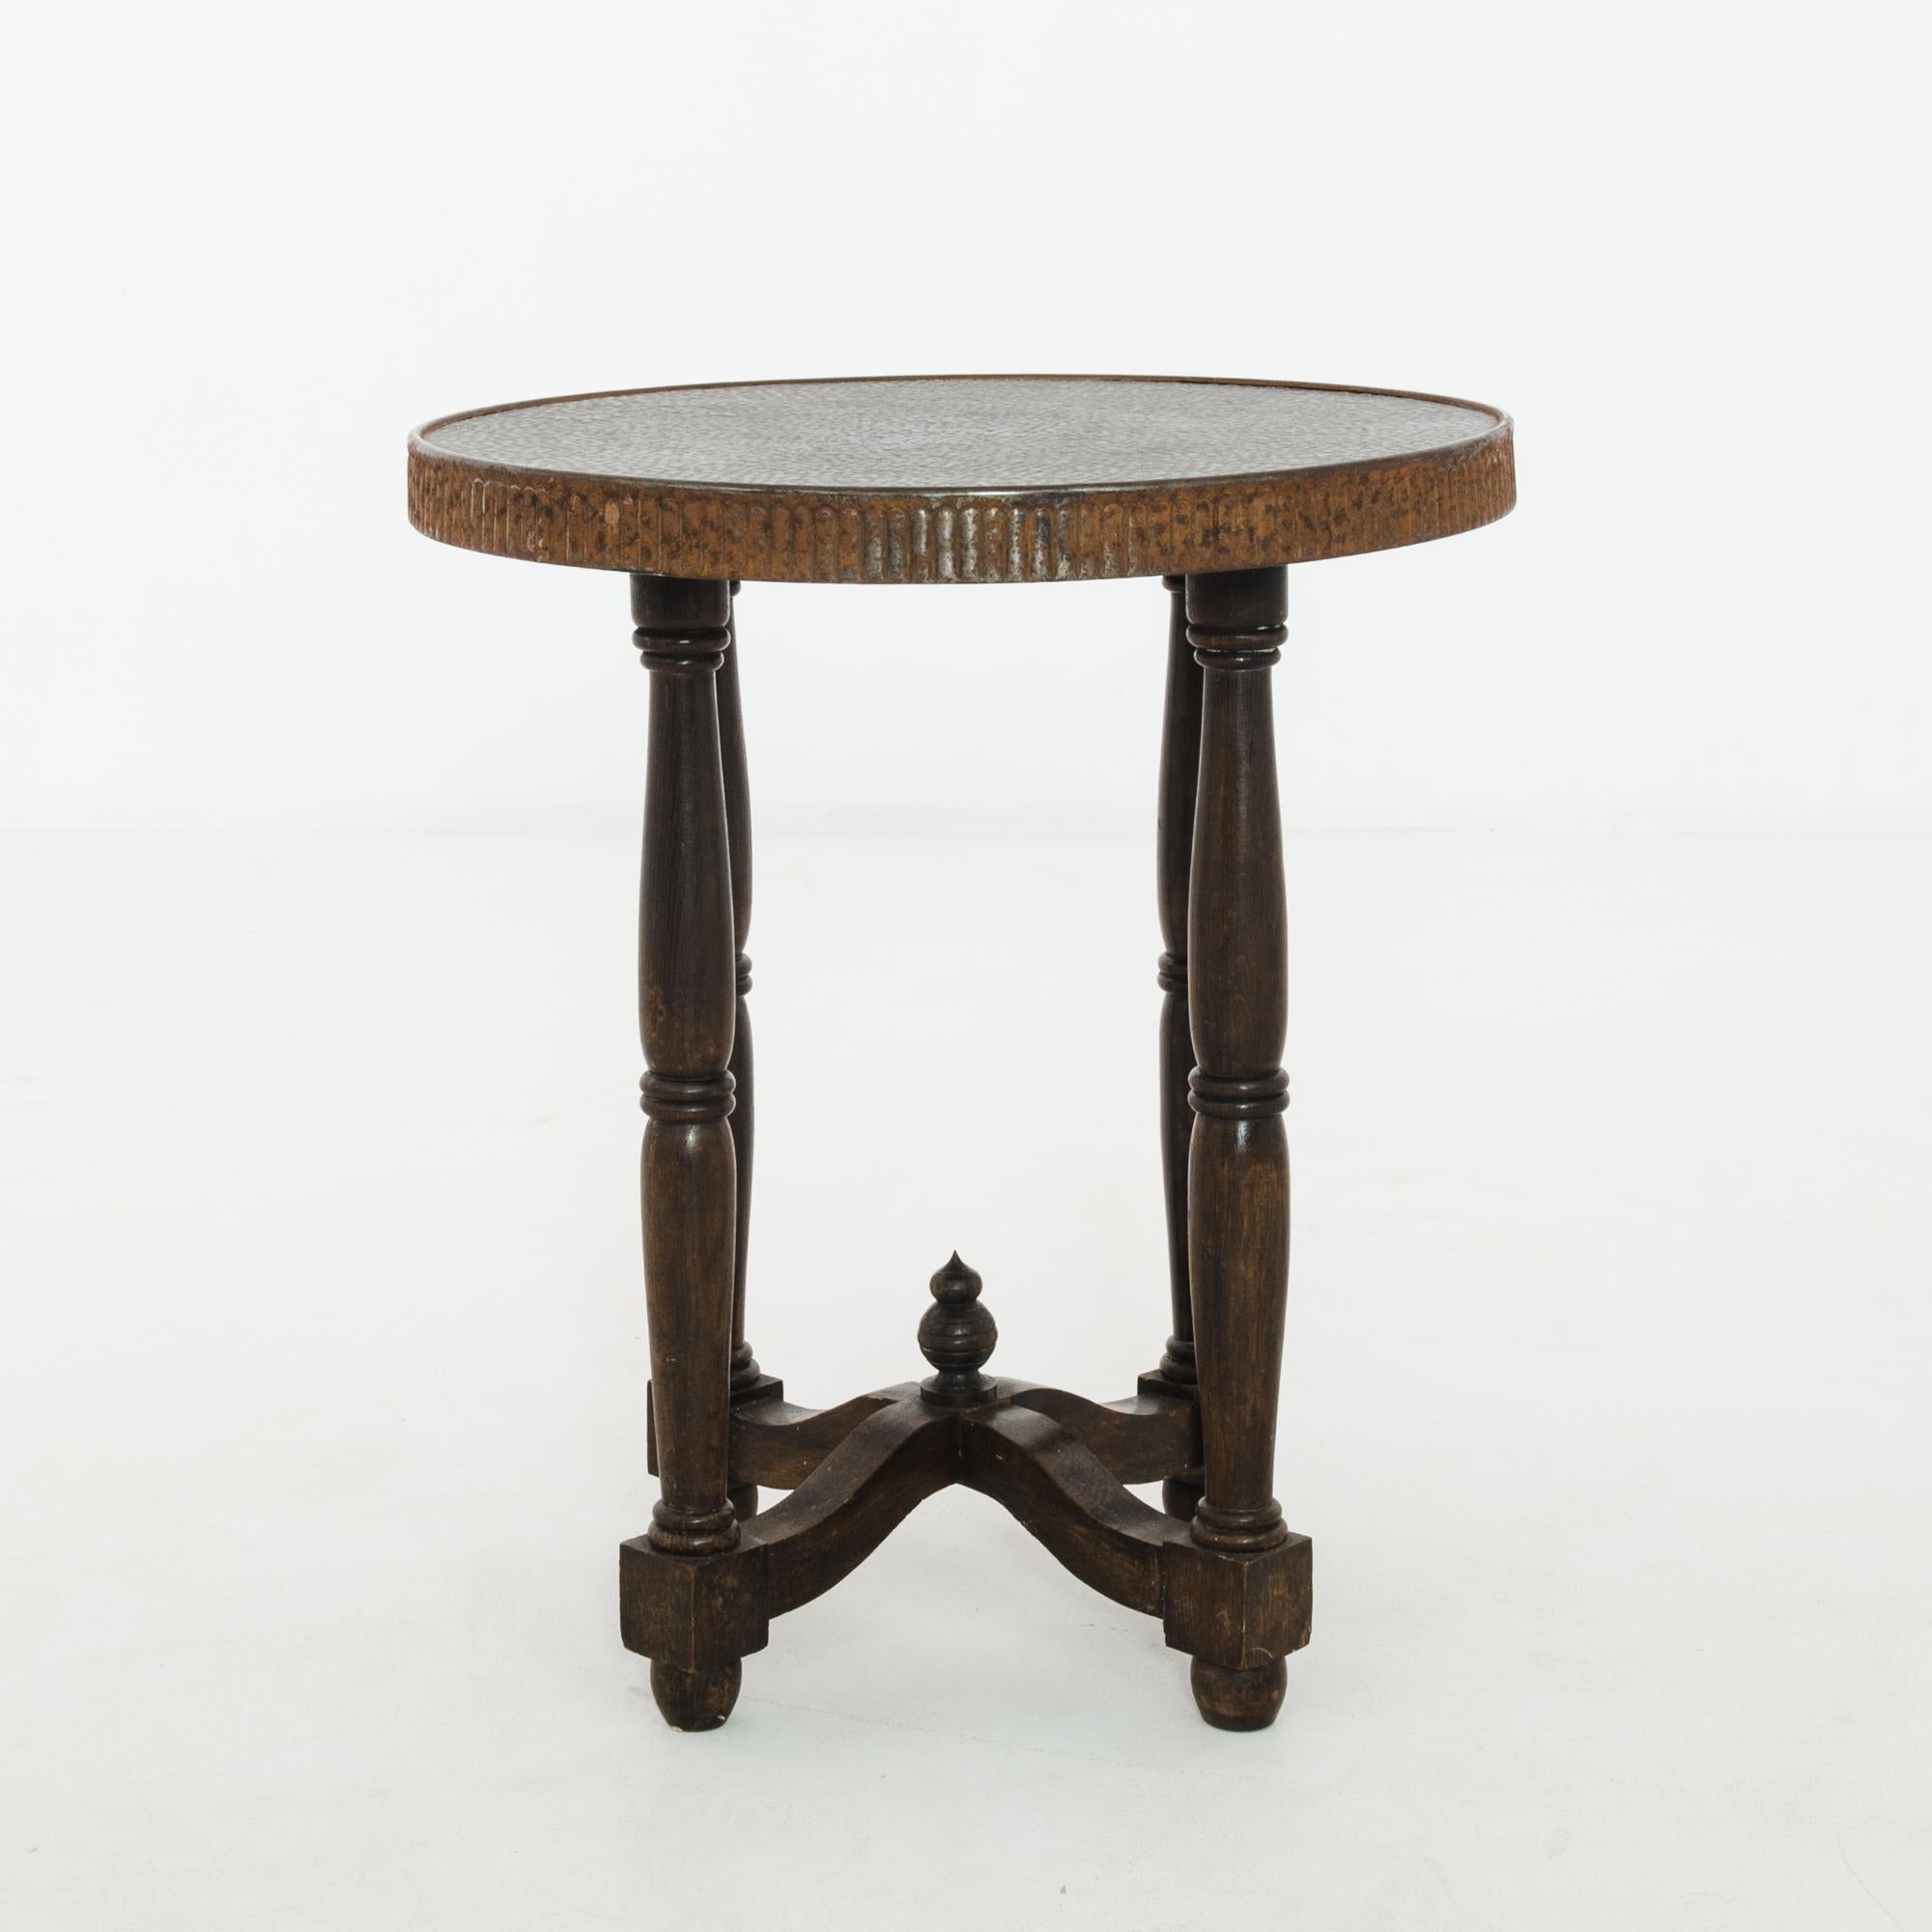 A wooden round table with metal top from Czechia, produced circa 1920. A small round side table with arched x stretcher capped by a two-tier finial in the style of the famous domes from the St. Basil’s Cathedral in Moscow. The embossed metal top has